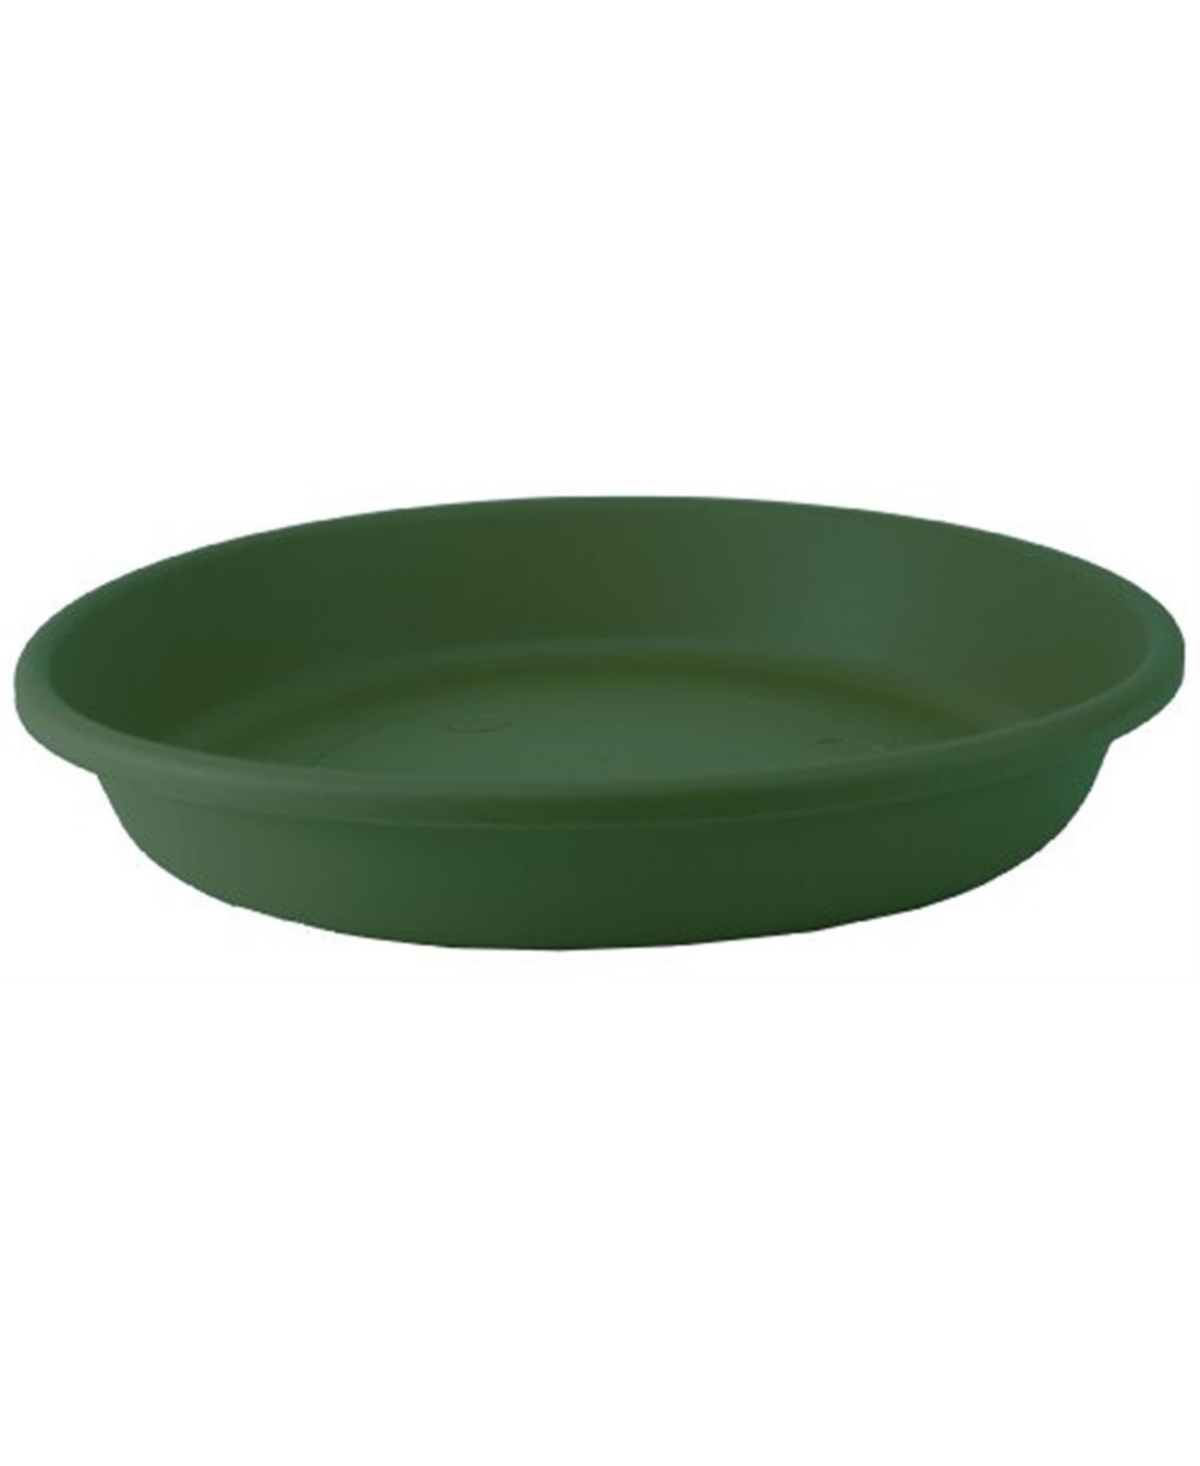 Flower Pot Drip Trays for Classic Planters, 16 - Evergreen - Green